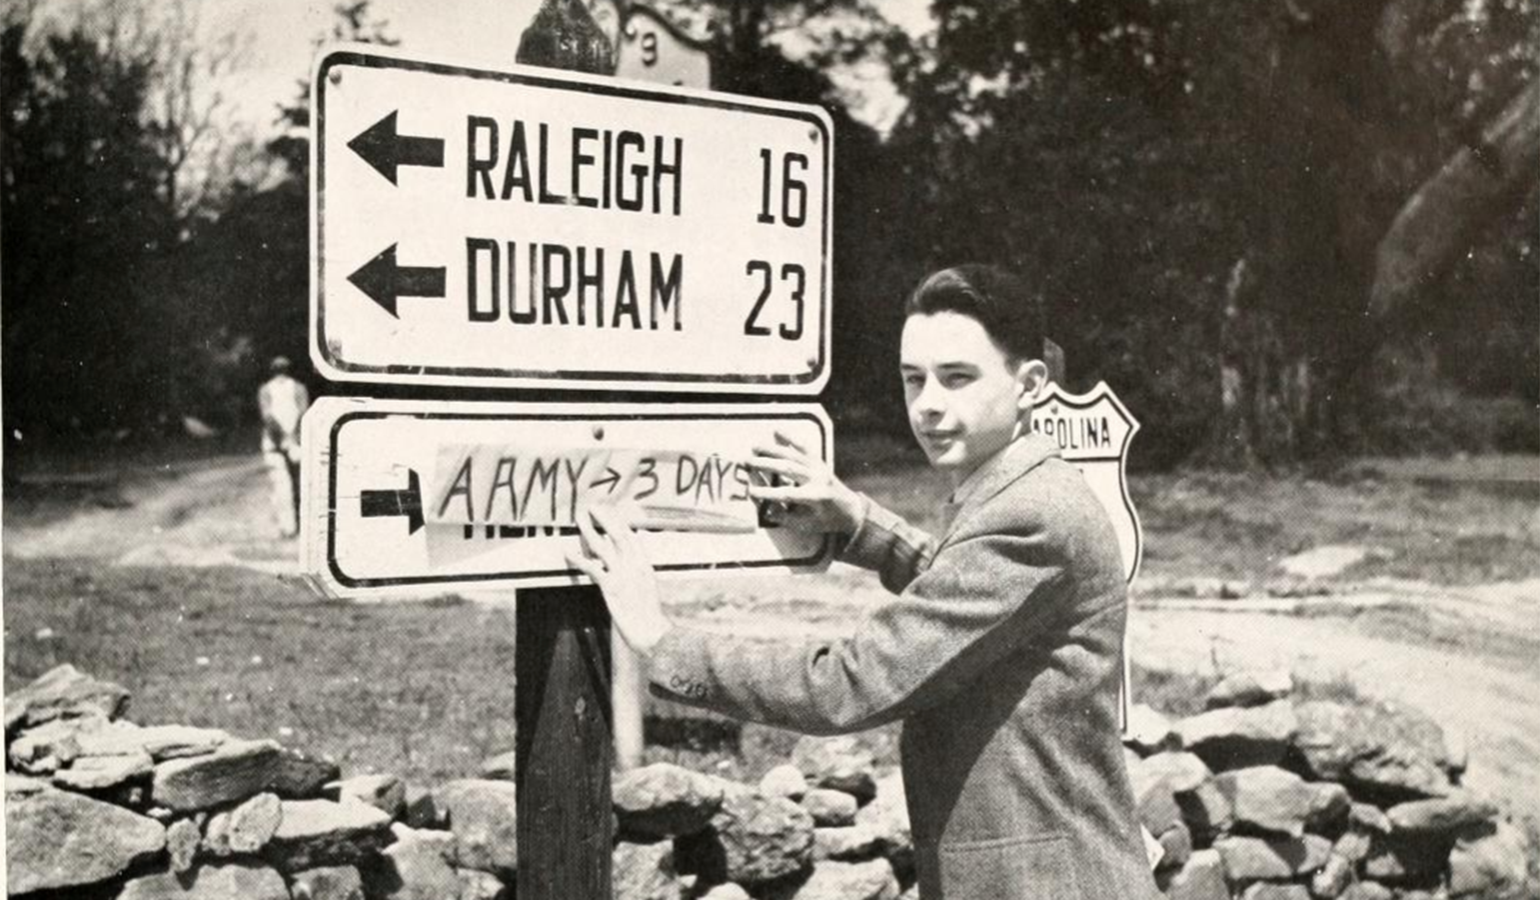 Wake Forest College senior and reservist Dean Willis called to duty in 1943.